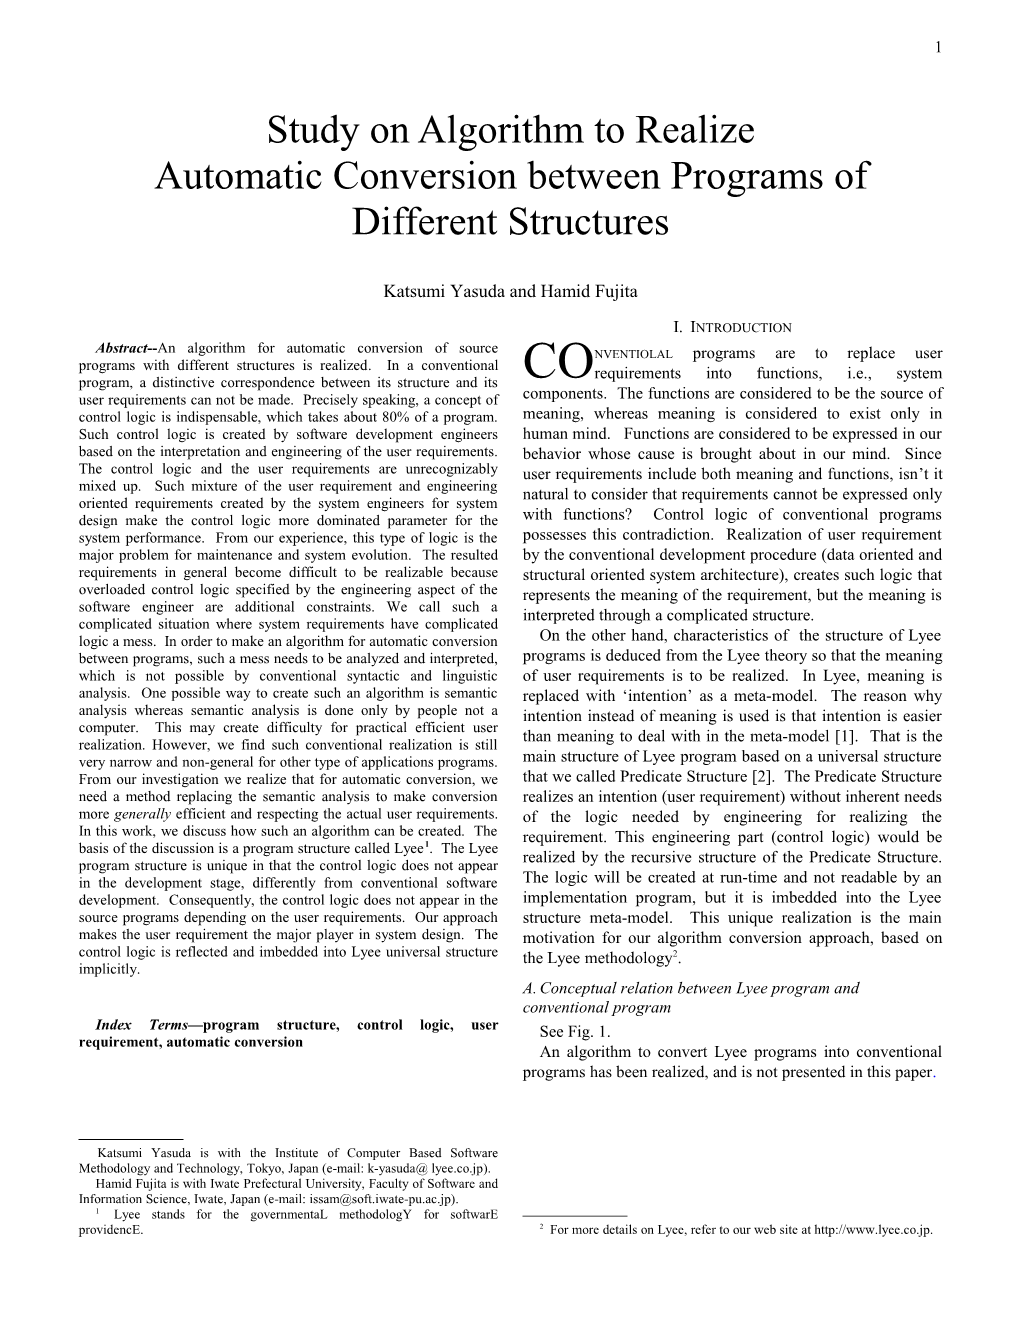 Automatic Conversion of Between Programs of Different Structures